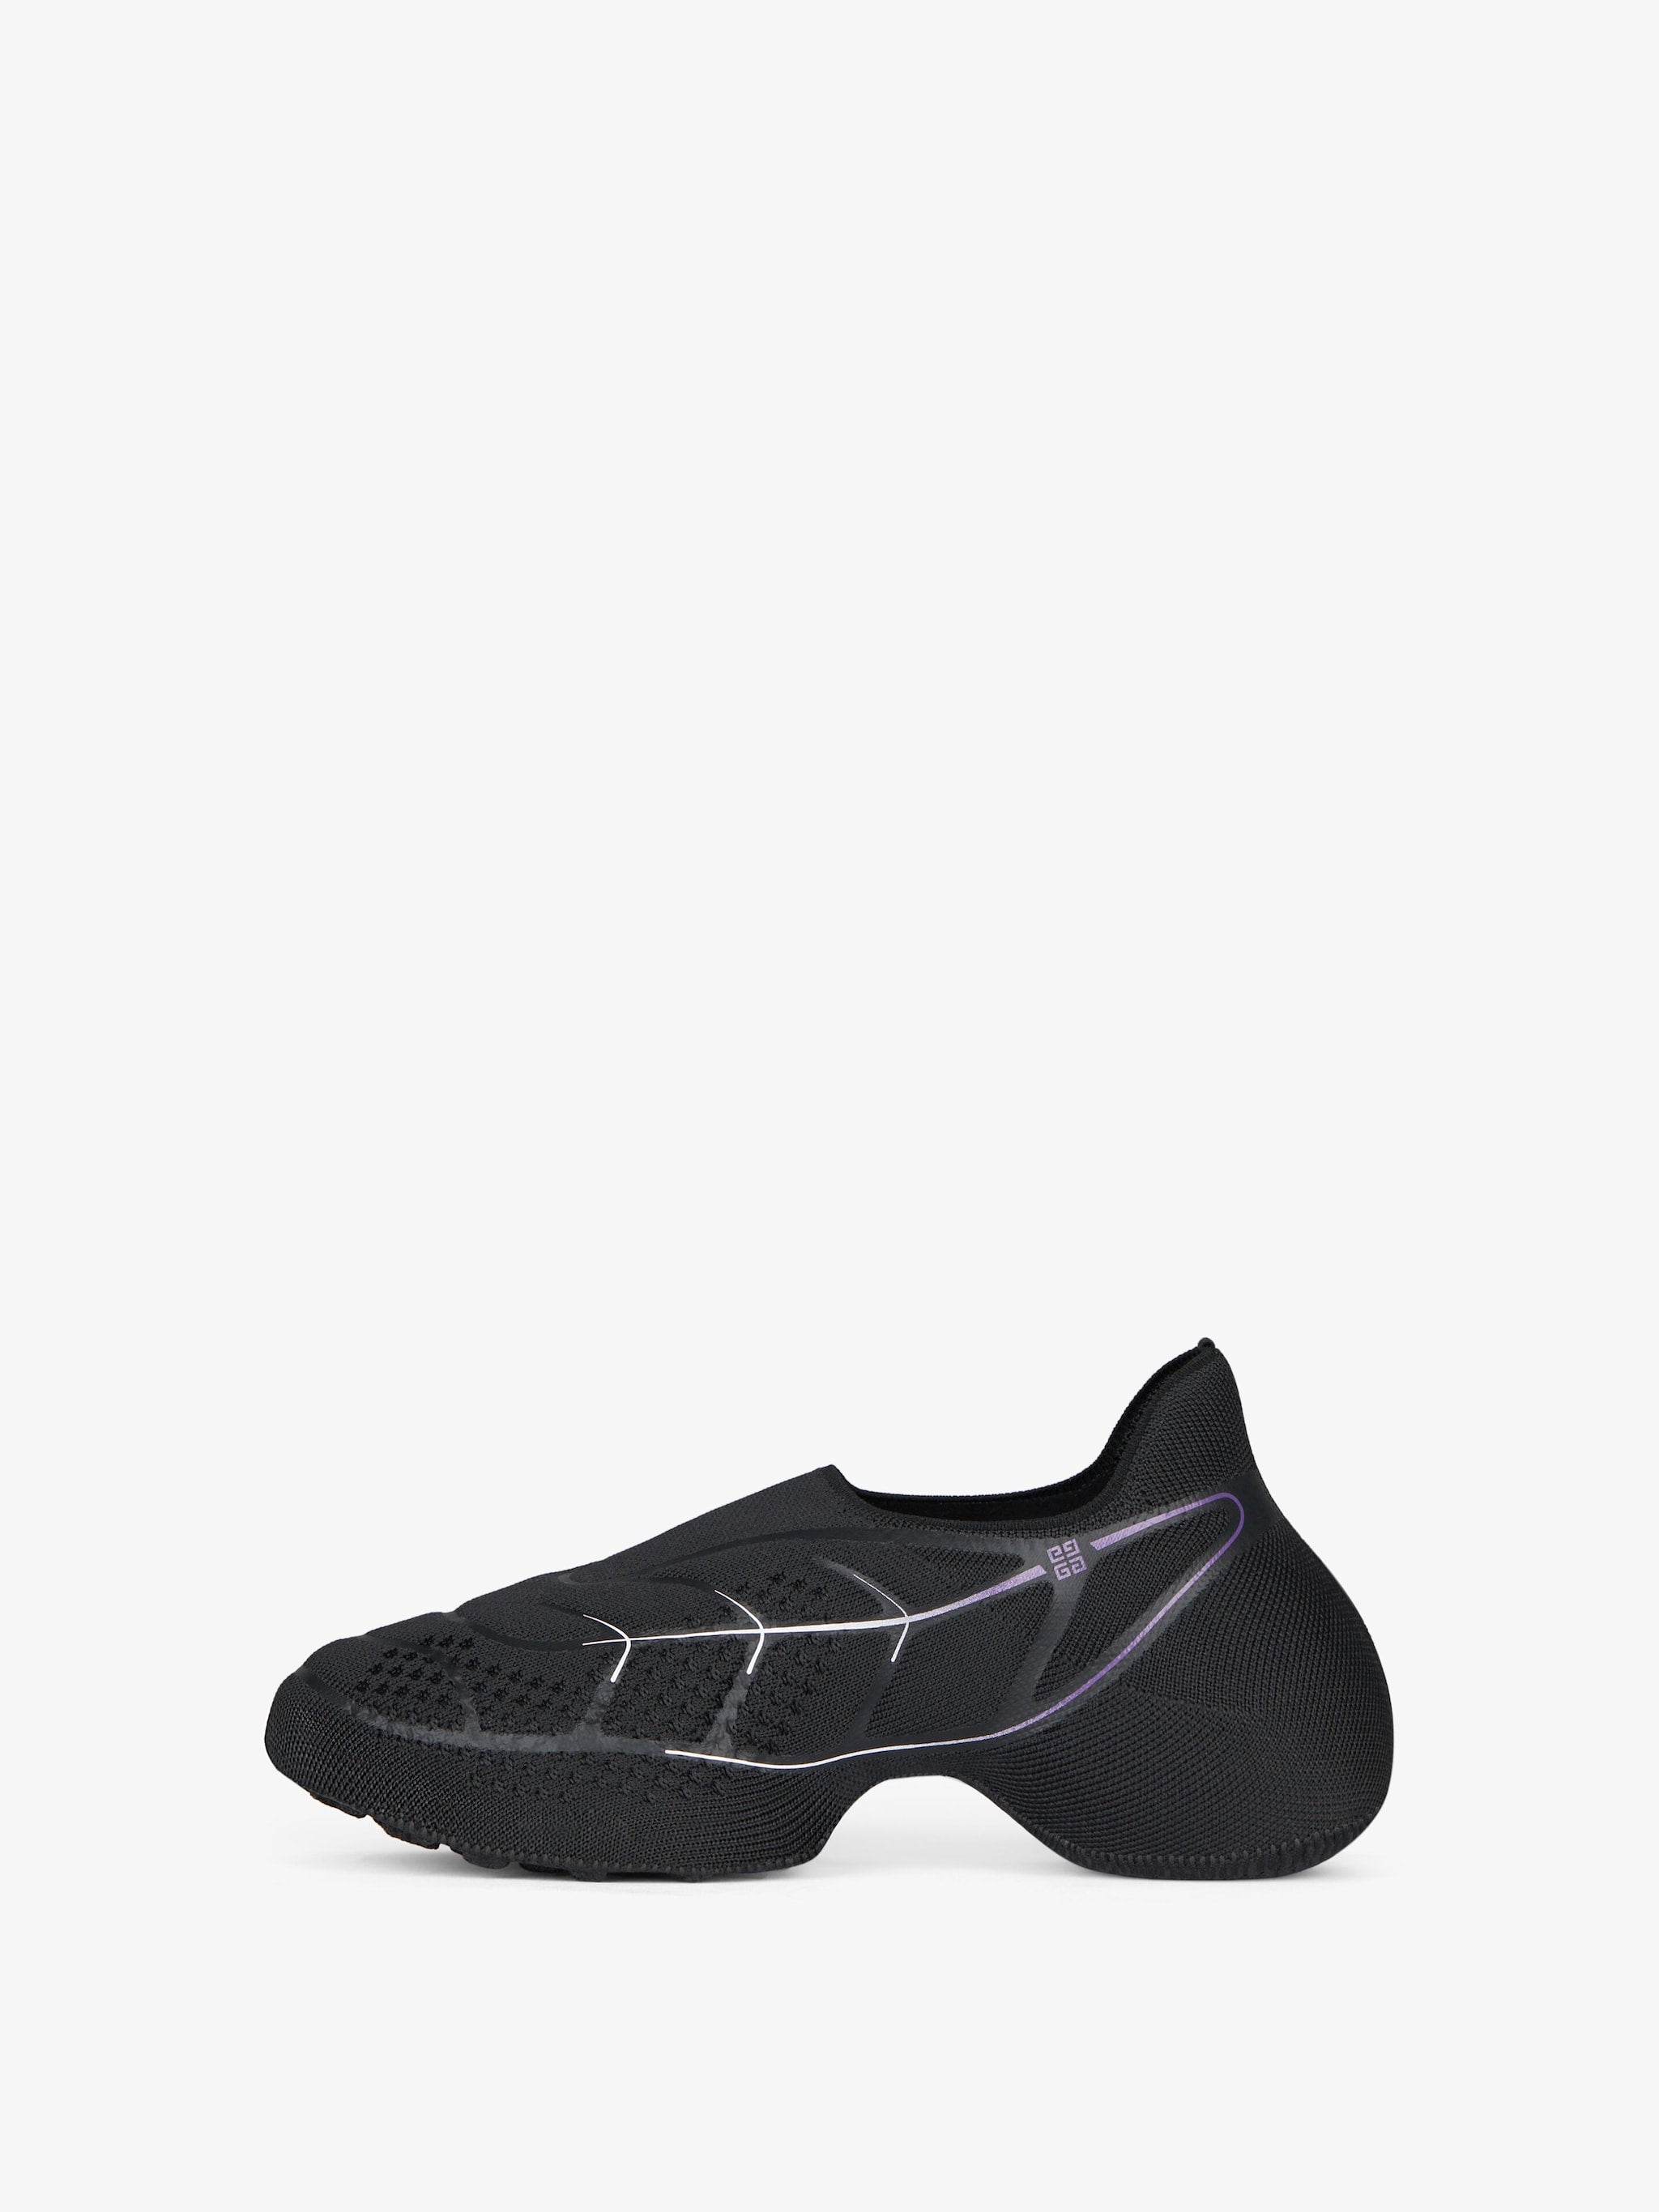 Givenchy TK-360+ Sneakers In Mesh Black / Purple